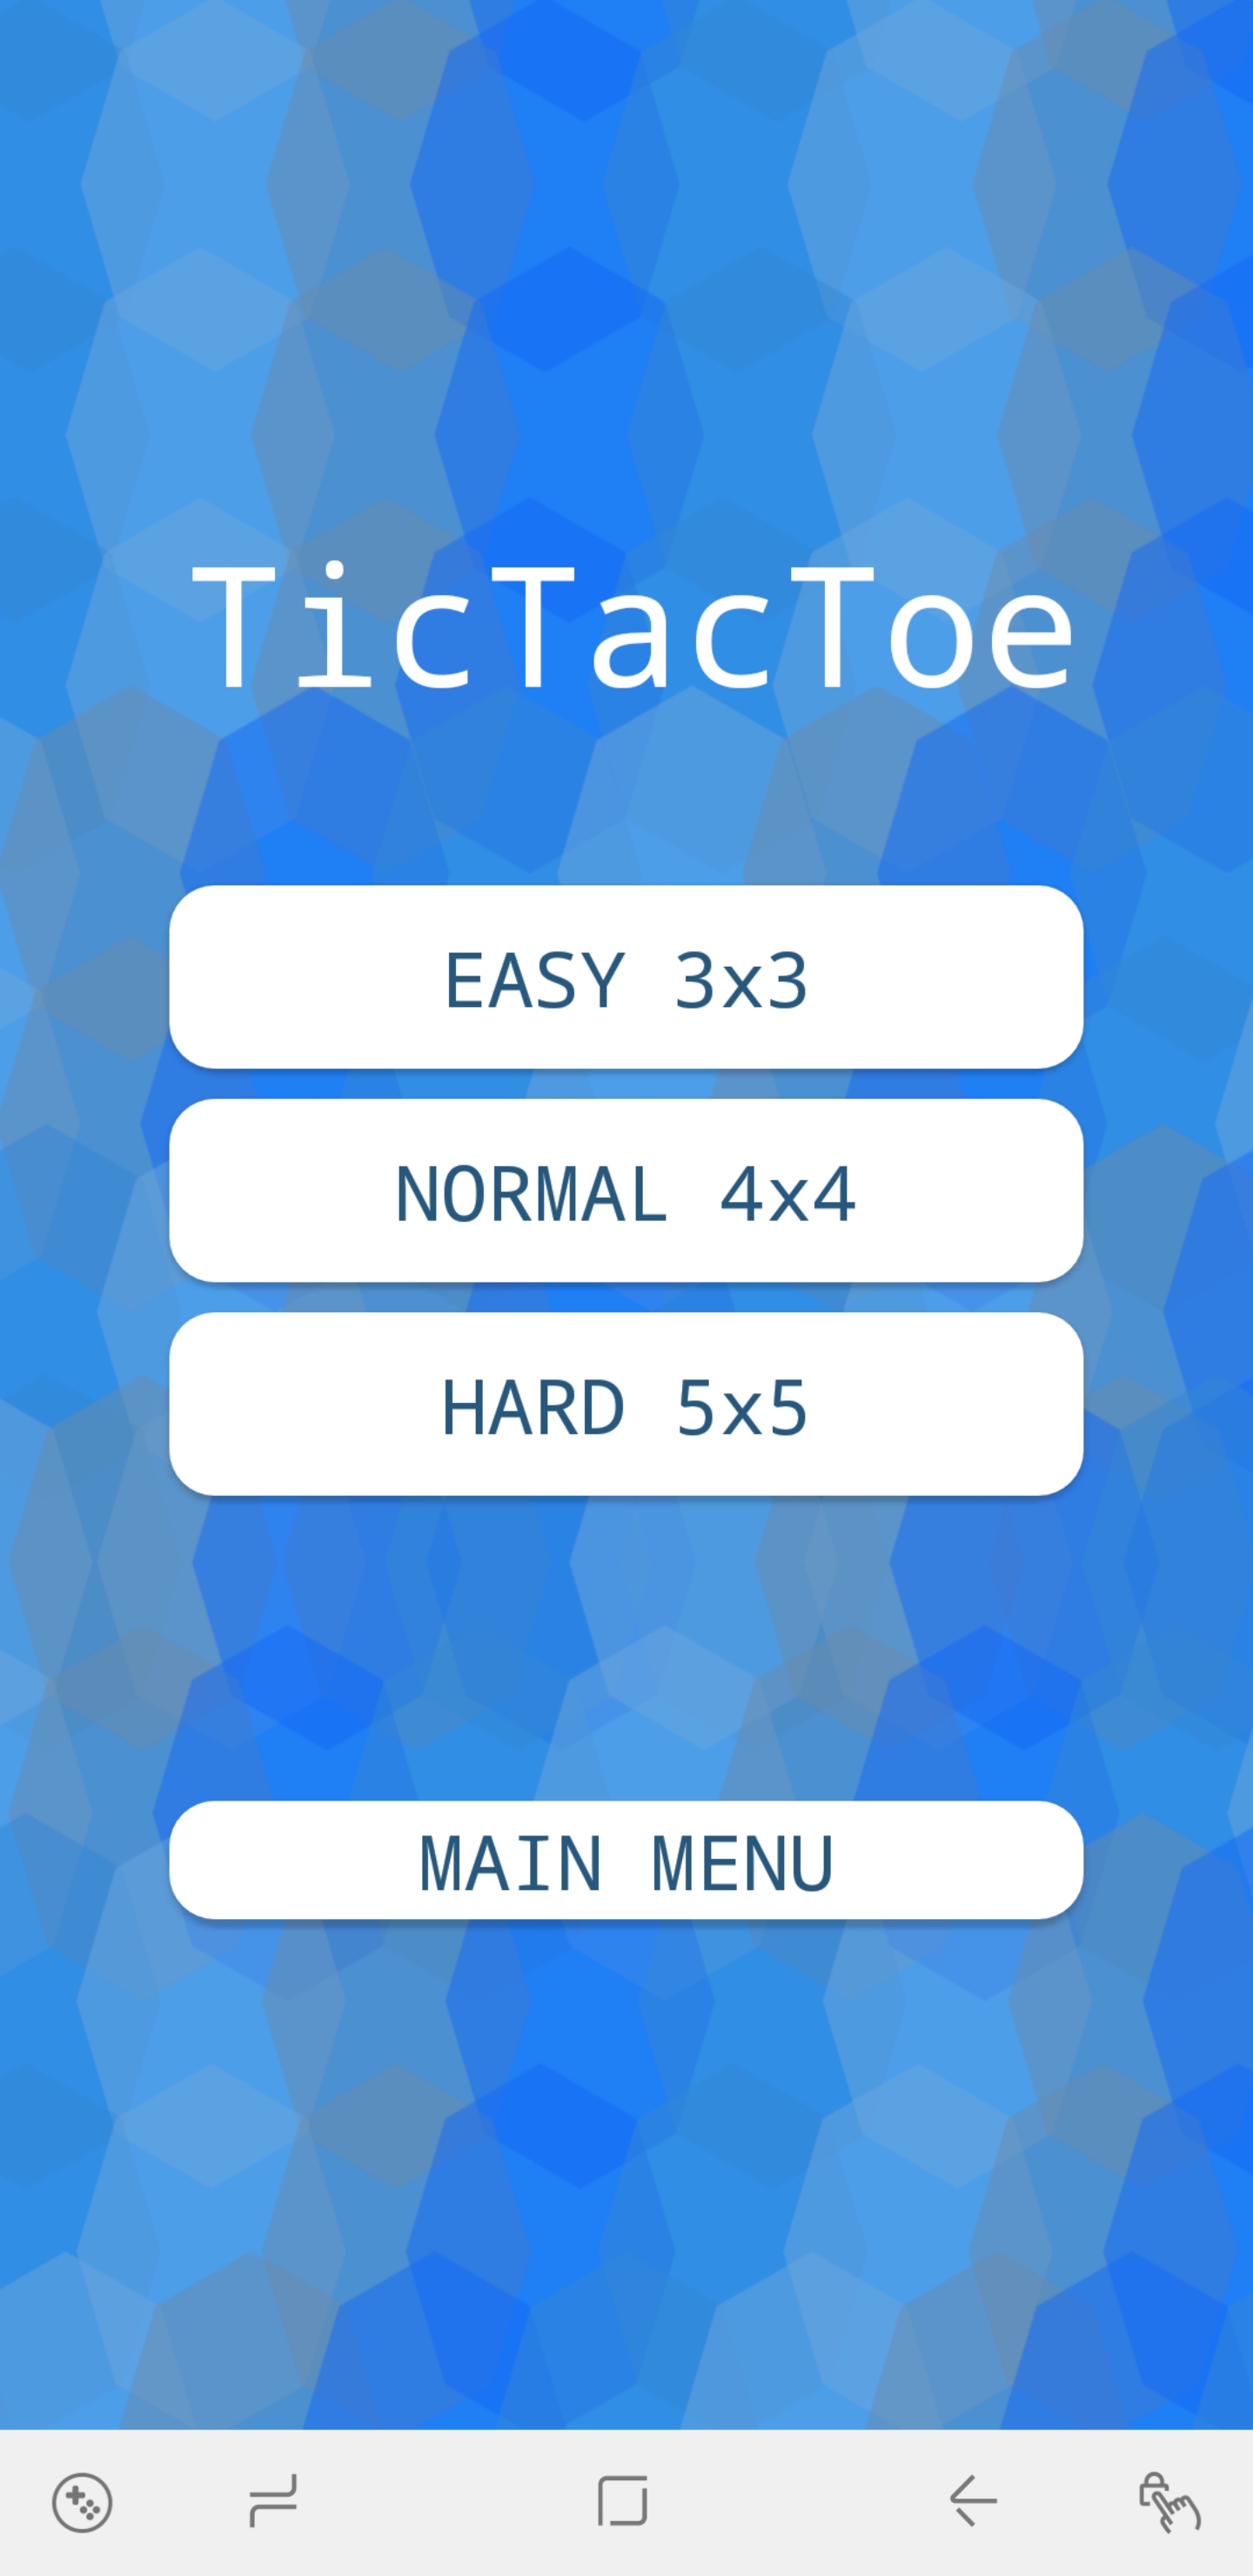 GitHub - jfoder/TicTacToe: Simple TicTacToe game for Android made